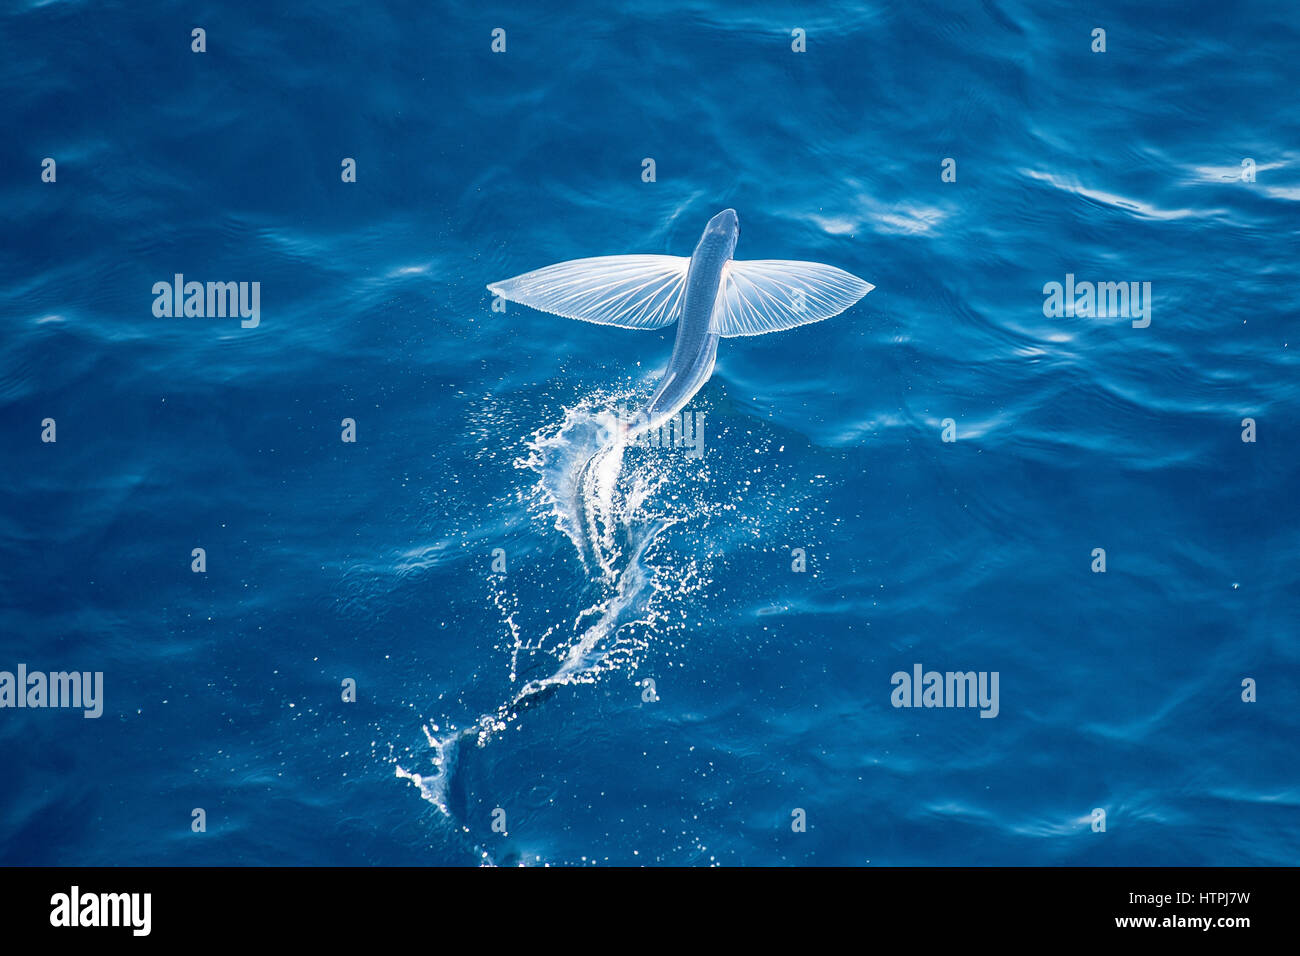 Flying Fish Species in mid air, scientific name unknown, several hundred miles off Mauritania, North Africa, Atlantic Ocean. Stock Photo